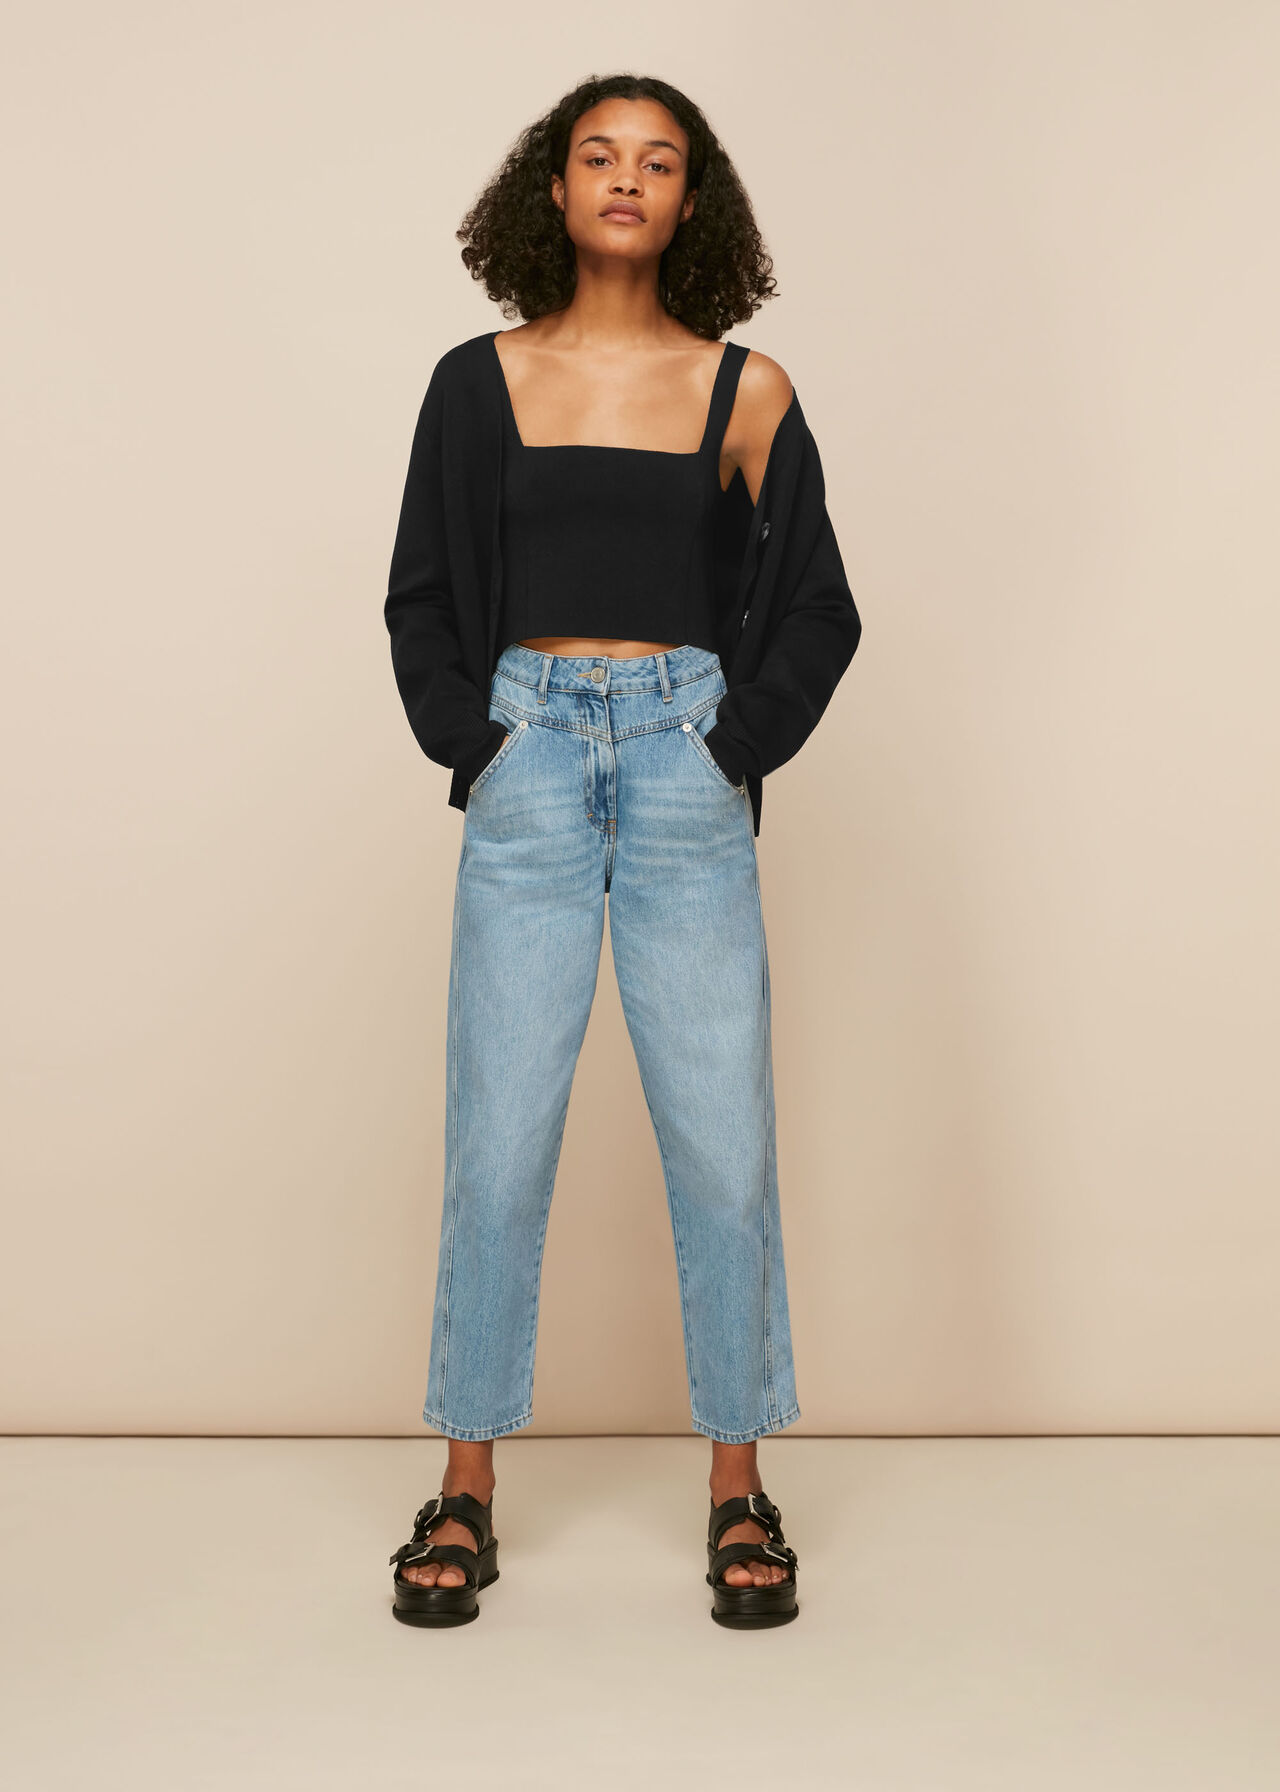 Black Square Knit Crop Top | WHISTLES